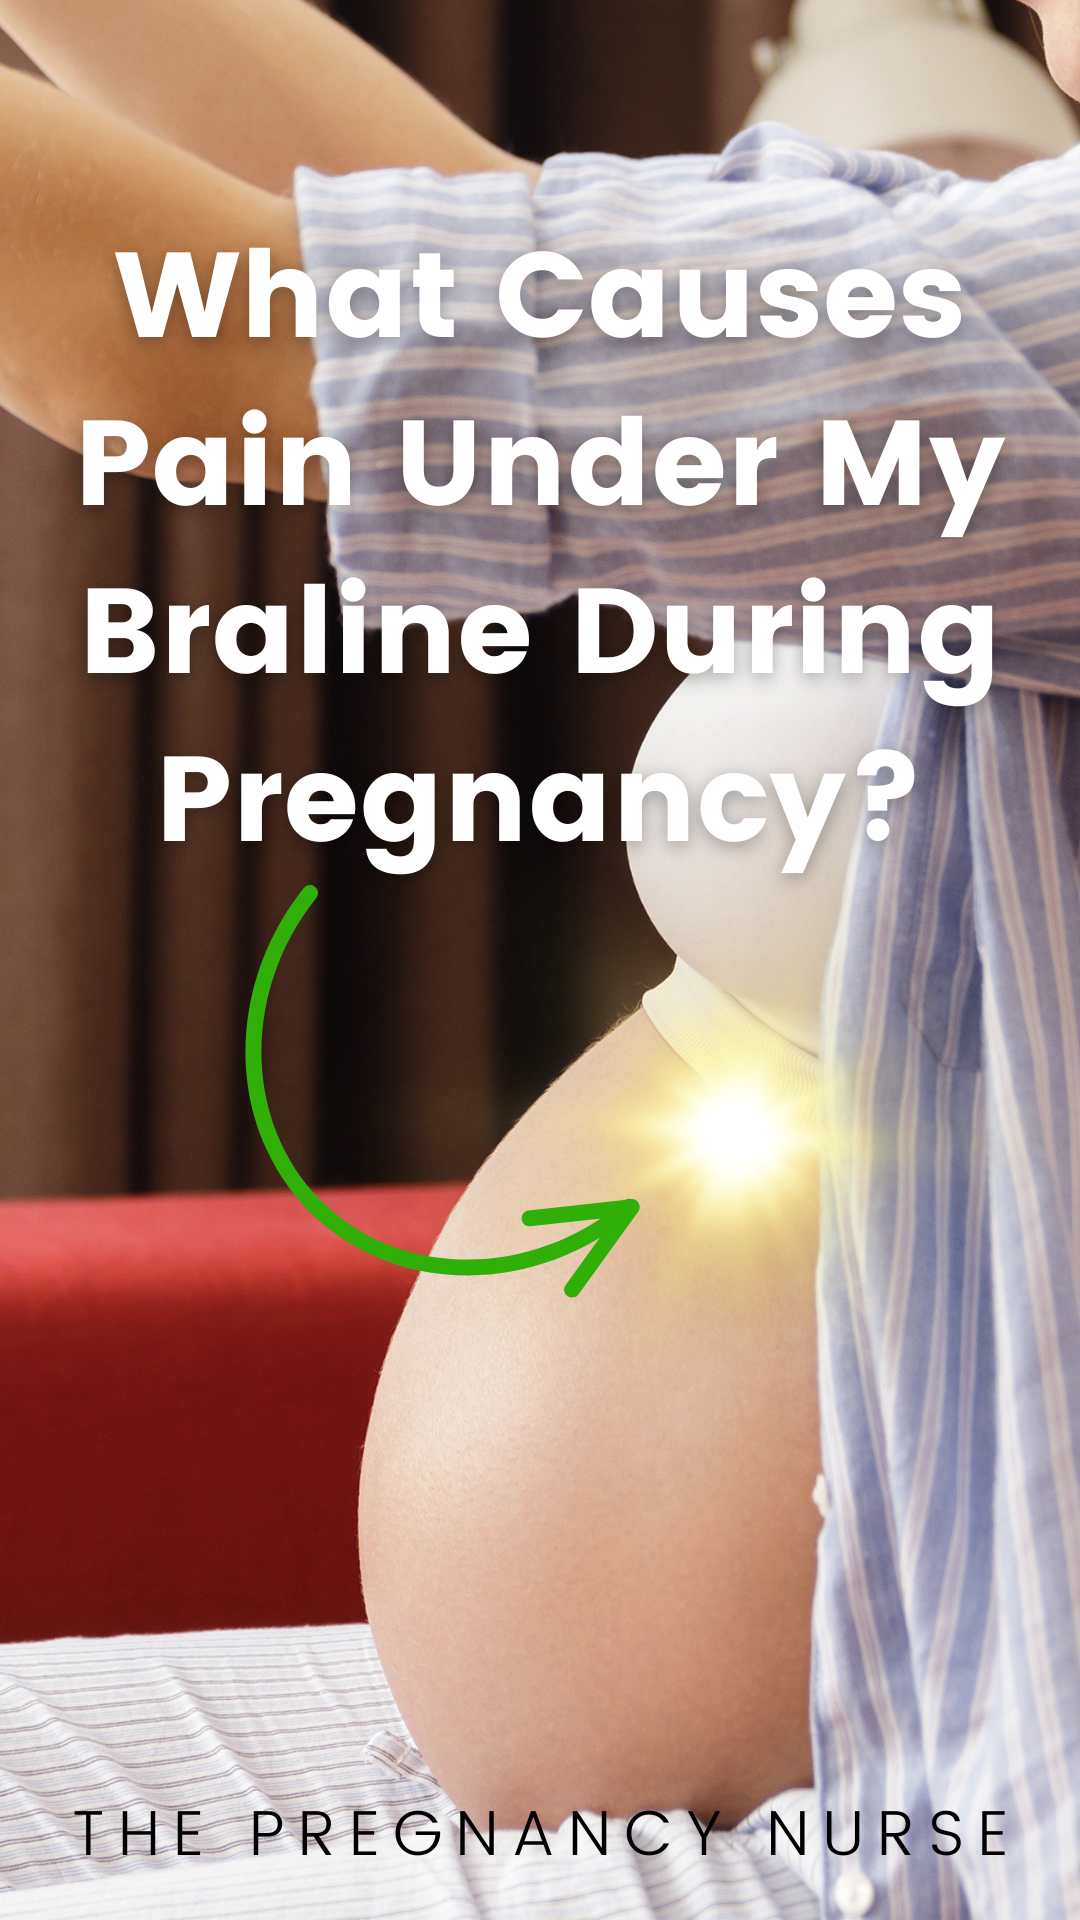 If you're experiencing pain under your bra line during pregnancy, it might be due to ligament pain. Learn about what's causing the pain and how you can ease it in this helpful post.